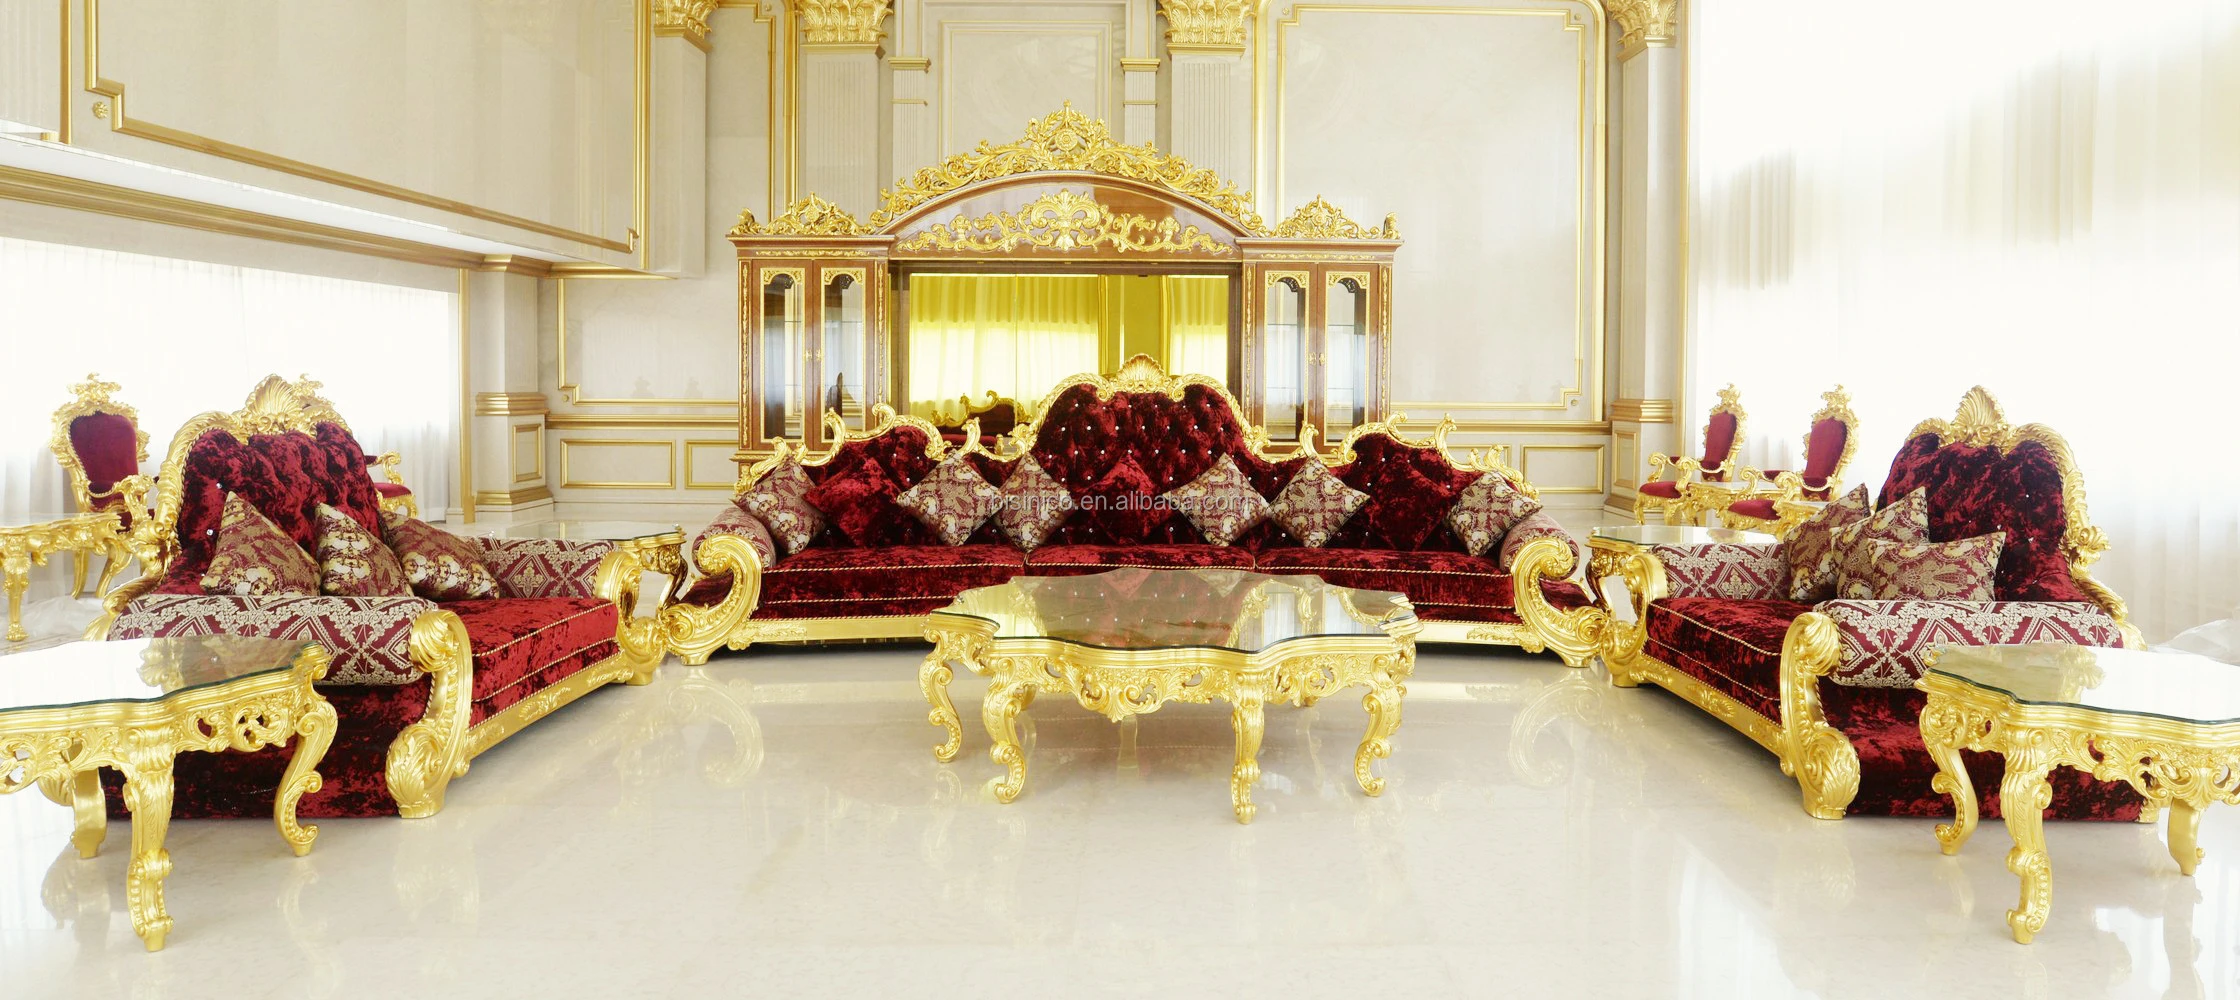 Luxury Rococo 24K Gold Solid Wood Carving Sectional Sofa Set 7 Seater Fancy French Louis XV Palace Royal Living Room Furniture